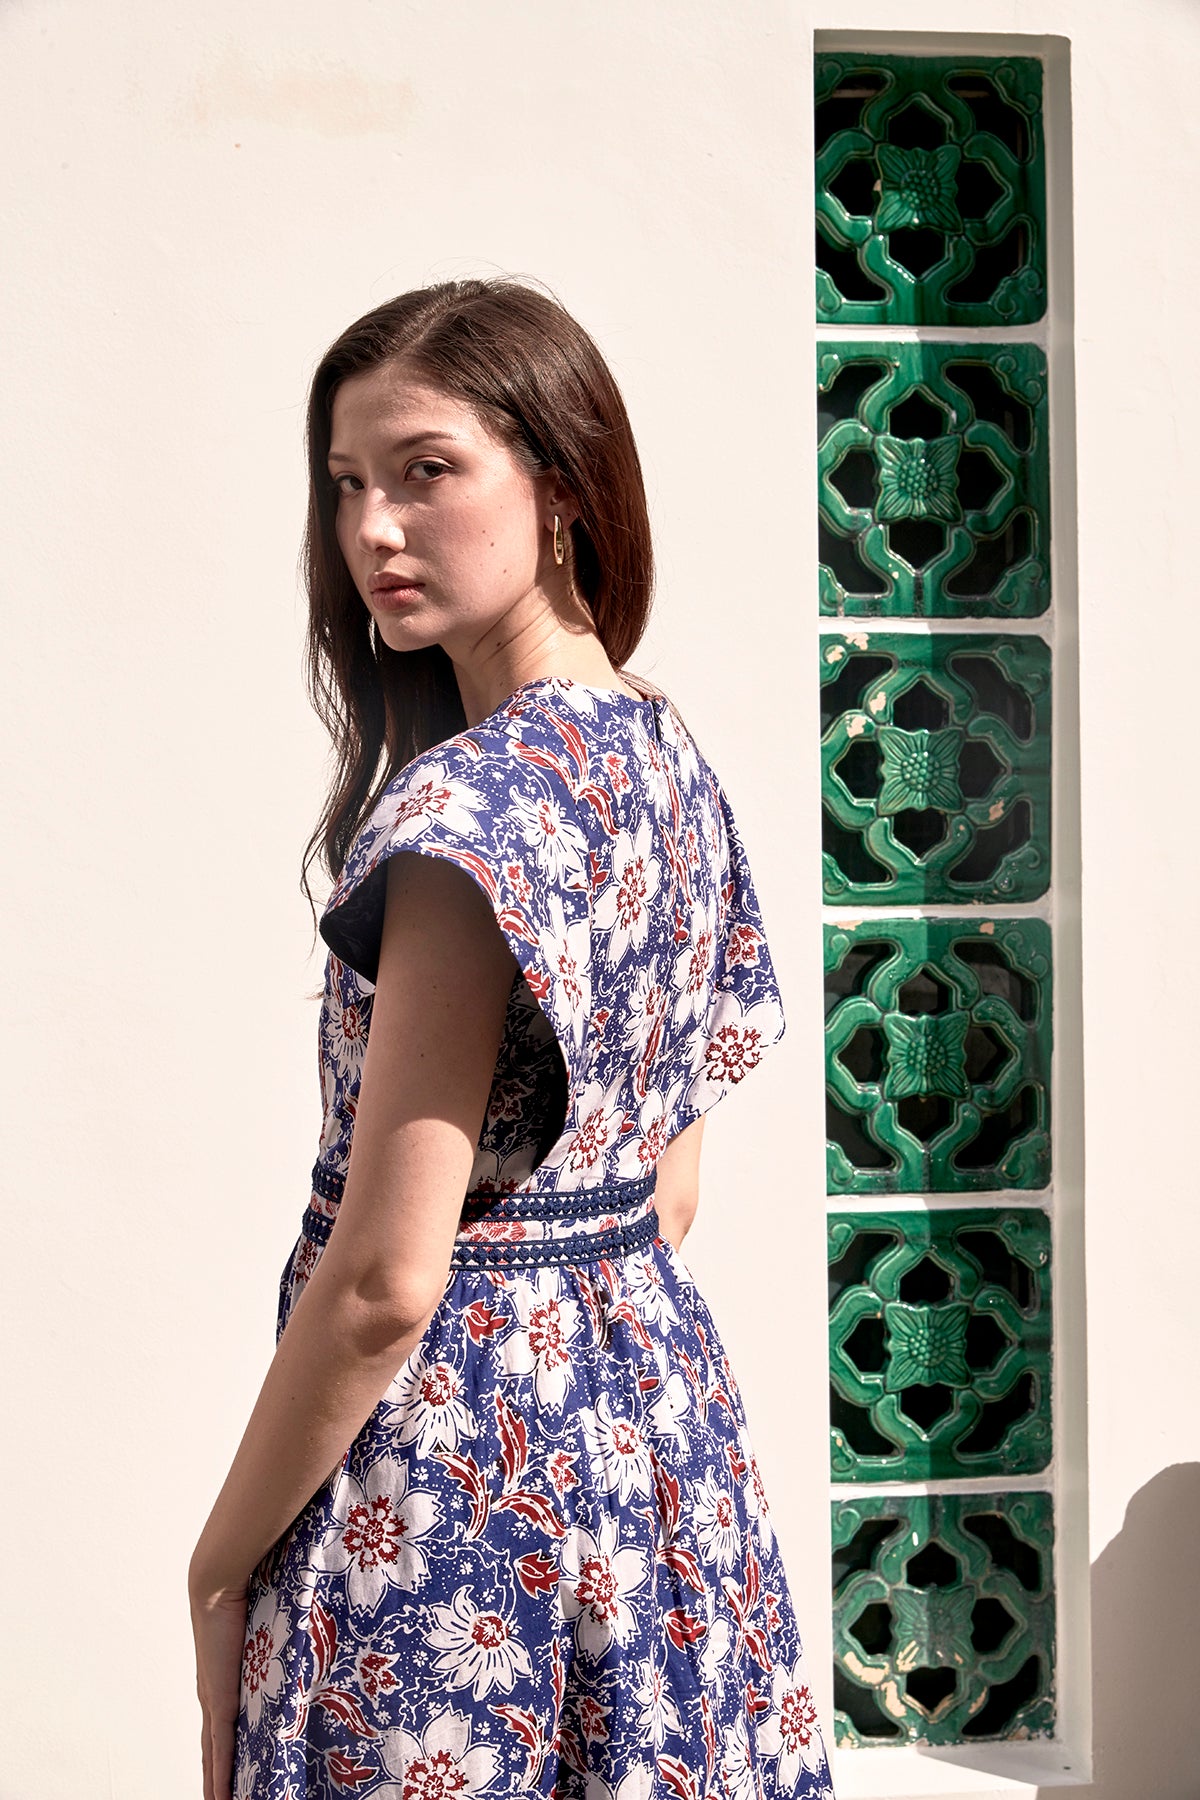 Eurasian female model, modelling a blue and red batik dress and lace trimmed waist. Picture showed the back view of the dress and with her head looking back at the camera. Dress has white flowers against blue background.